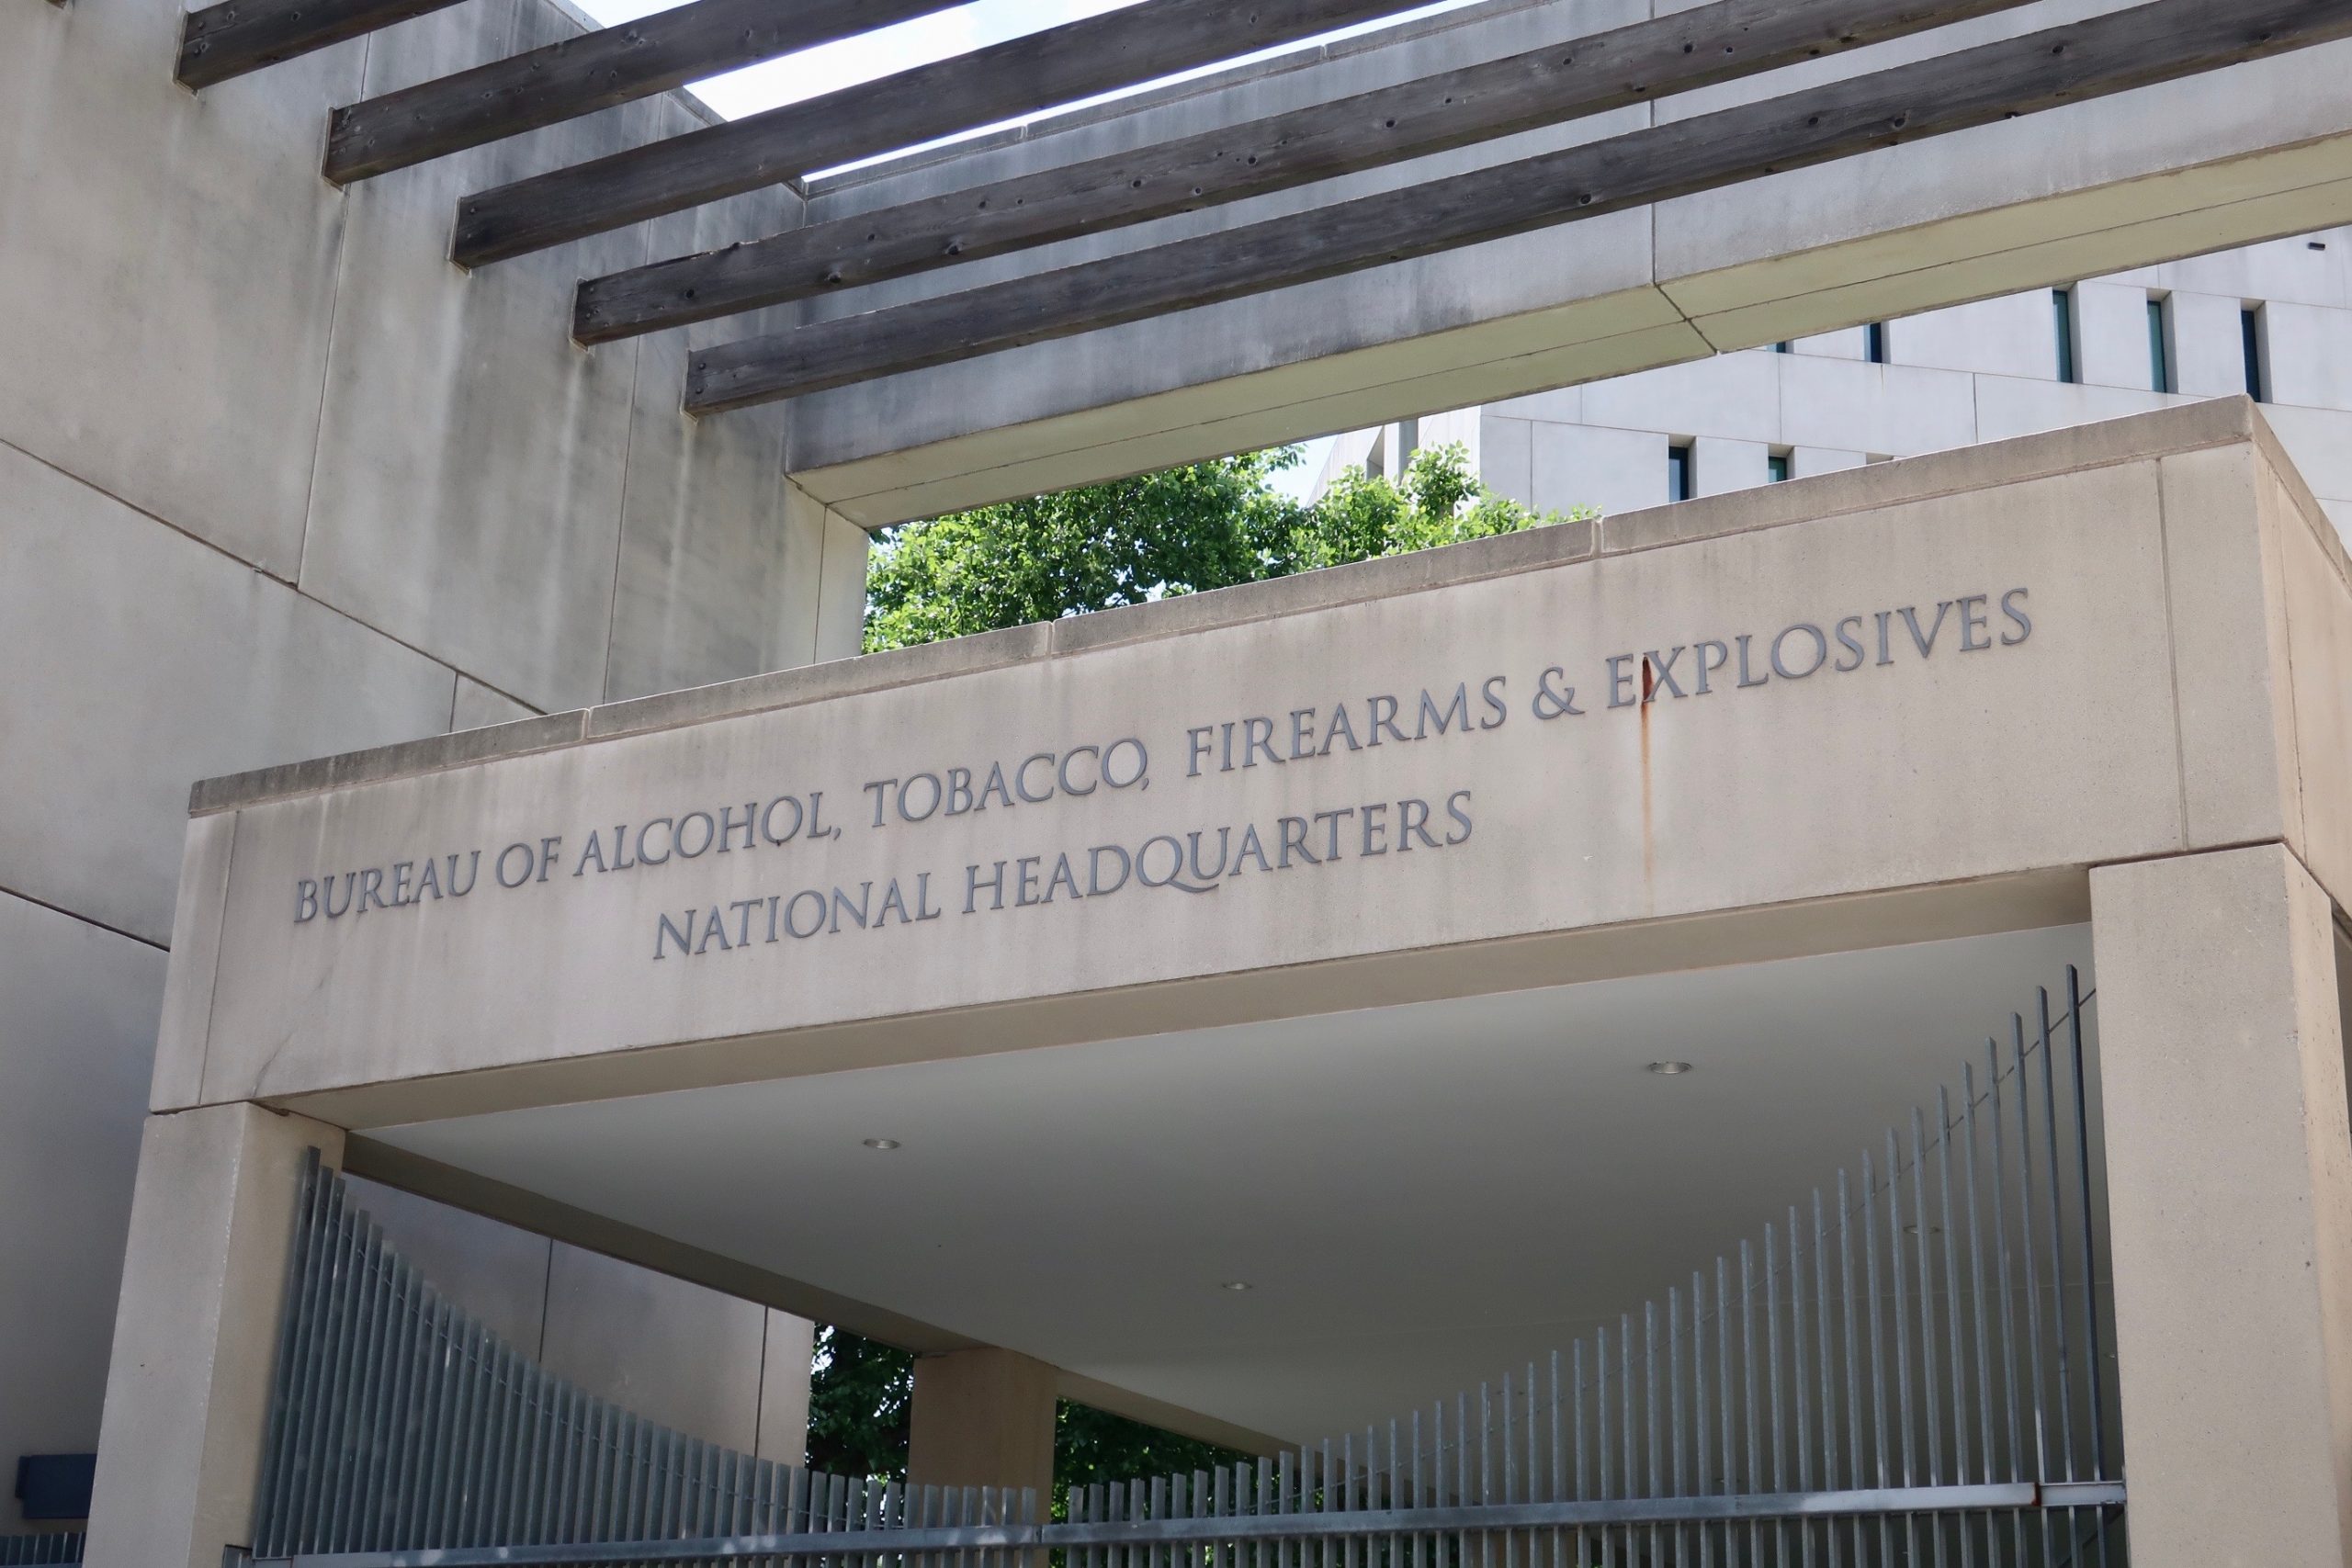 Cement building with Bureau of Alco،l, Tobacco, Firearms and Explosives sign